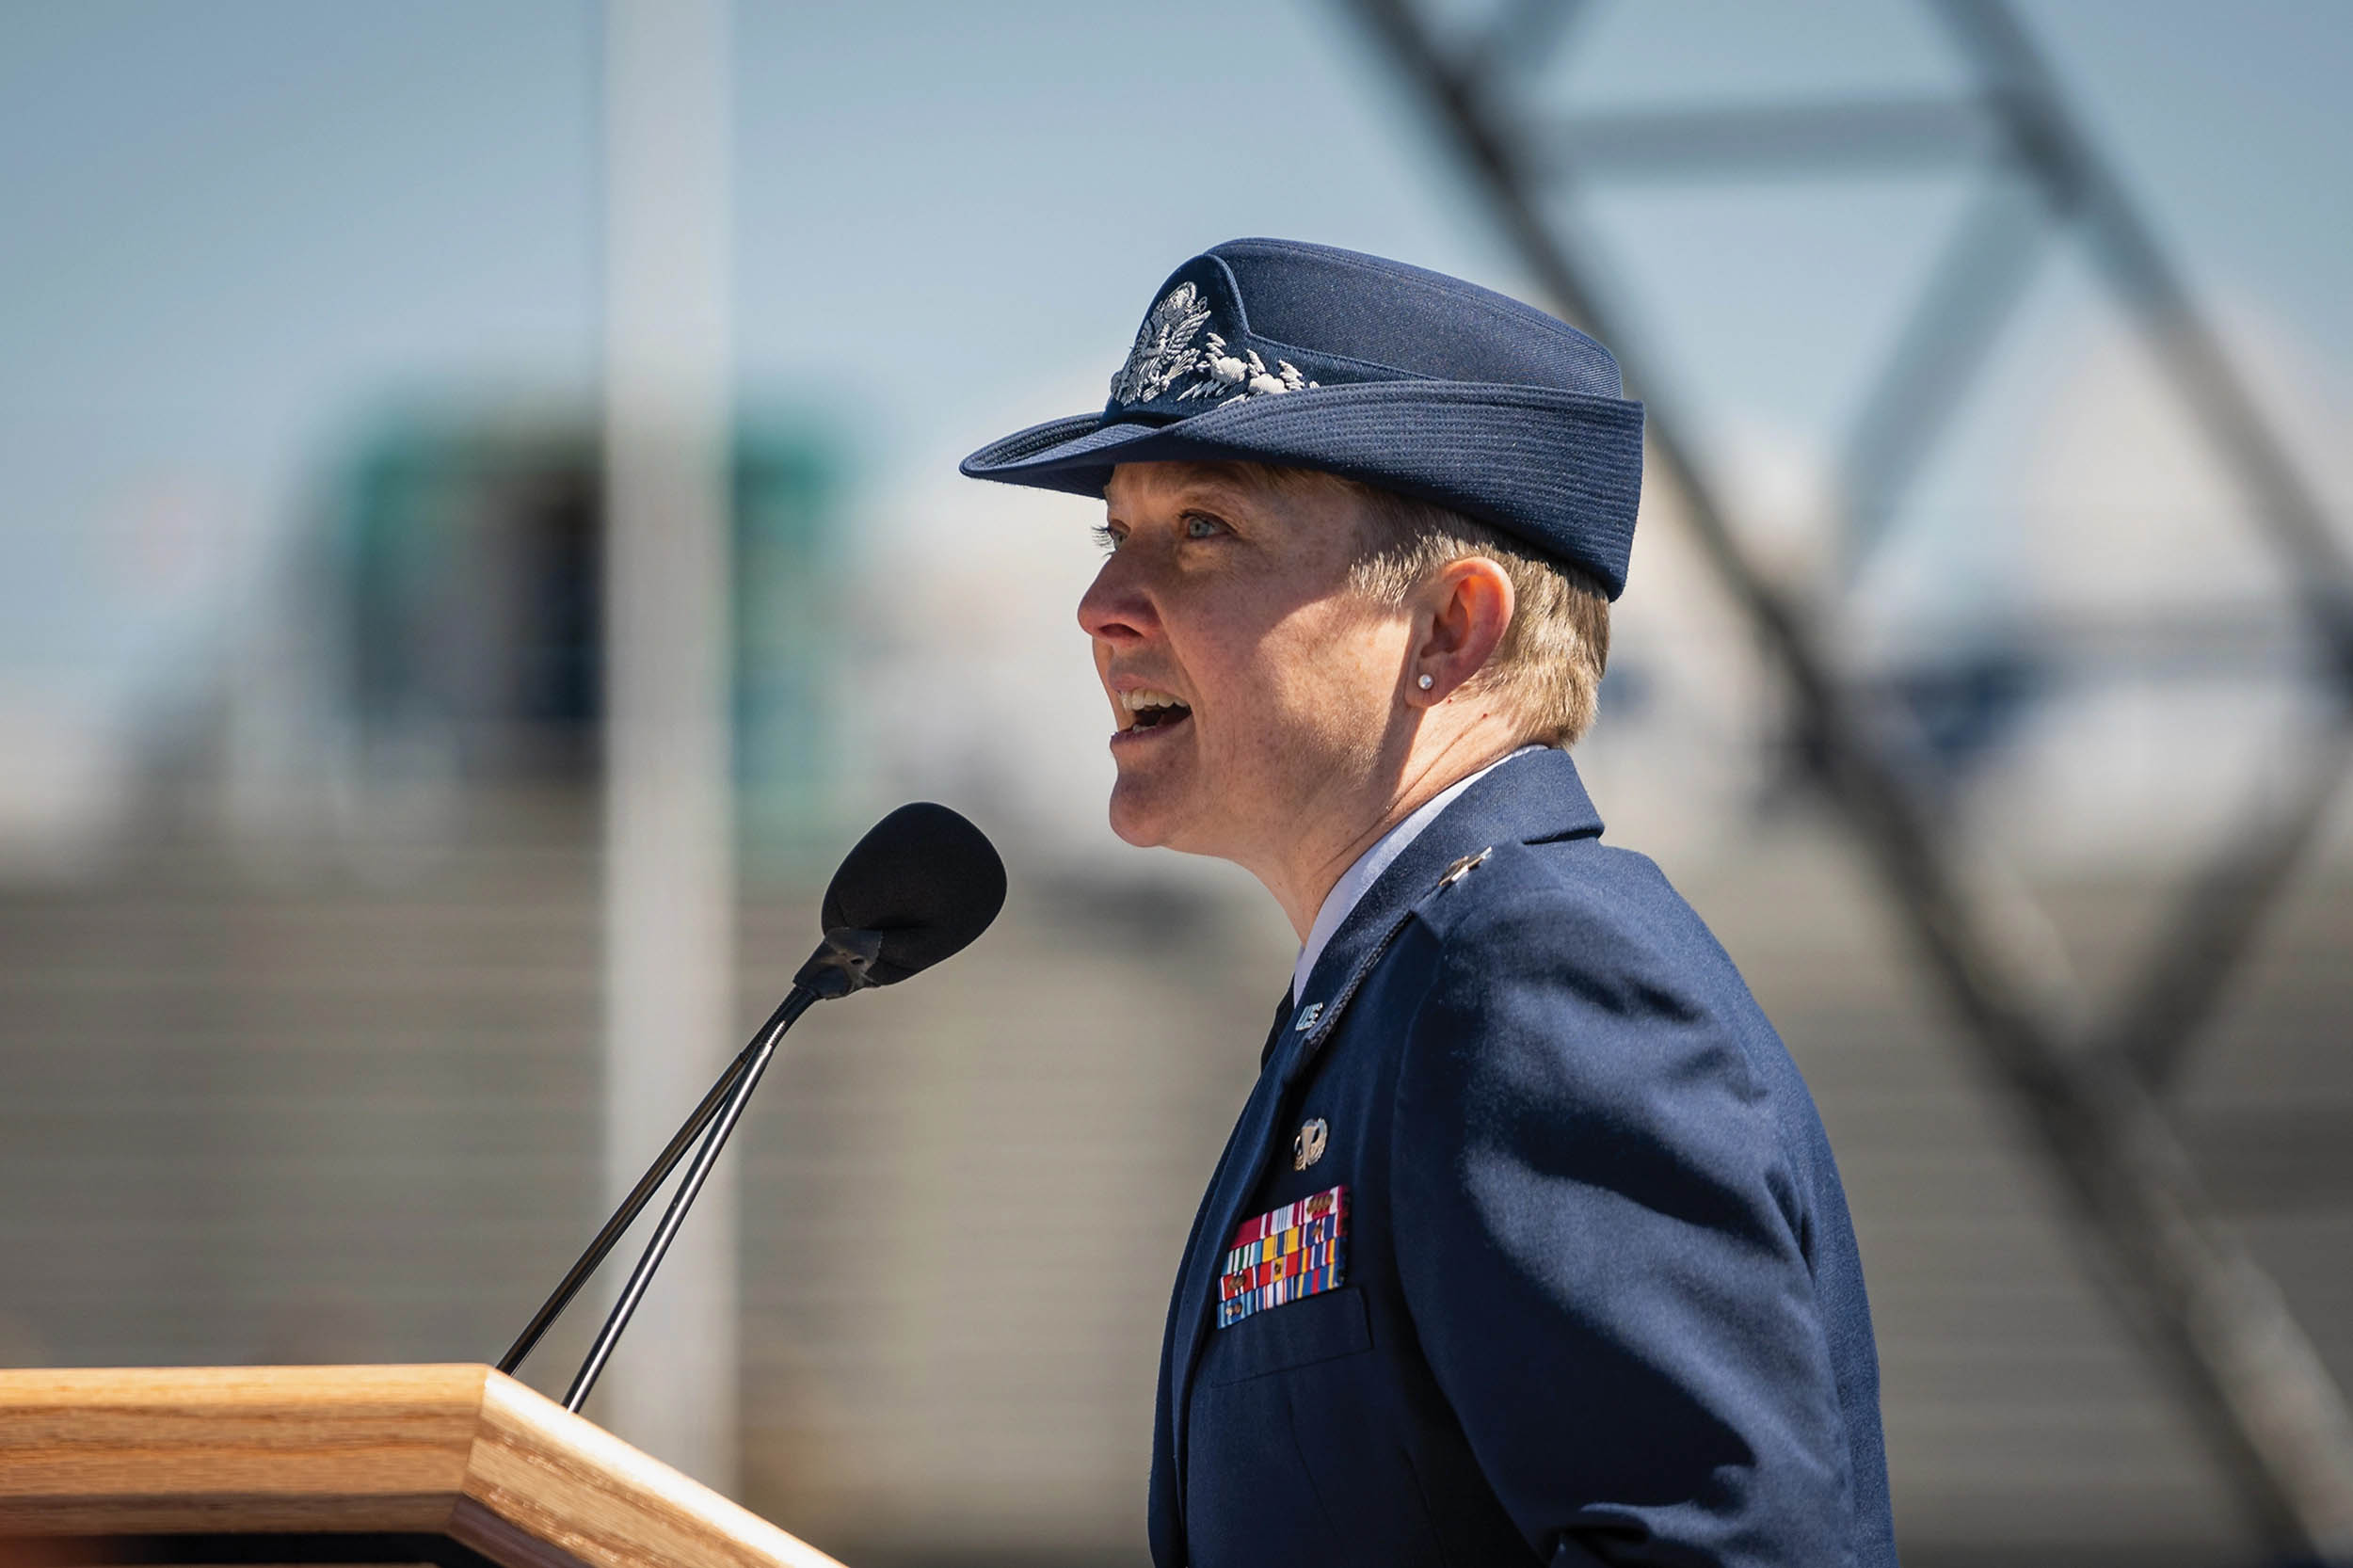 Brigadier General Linell A. Letendre, Dean of Faculty, delivers remarks to Class of 2022 at Graduation Ceremony at Air Force Academy, Colorado Springs, Colorado, May 25, 2022 (U.S. Air Force/Justin R. Pacheco)